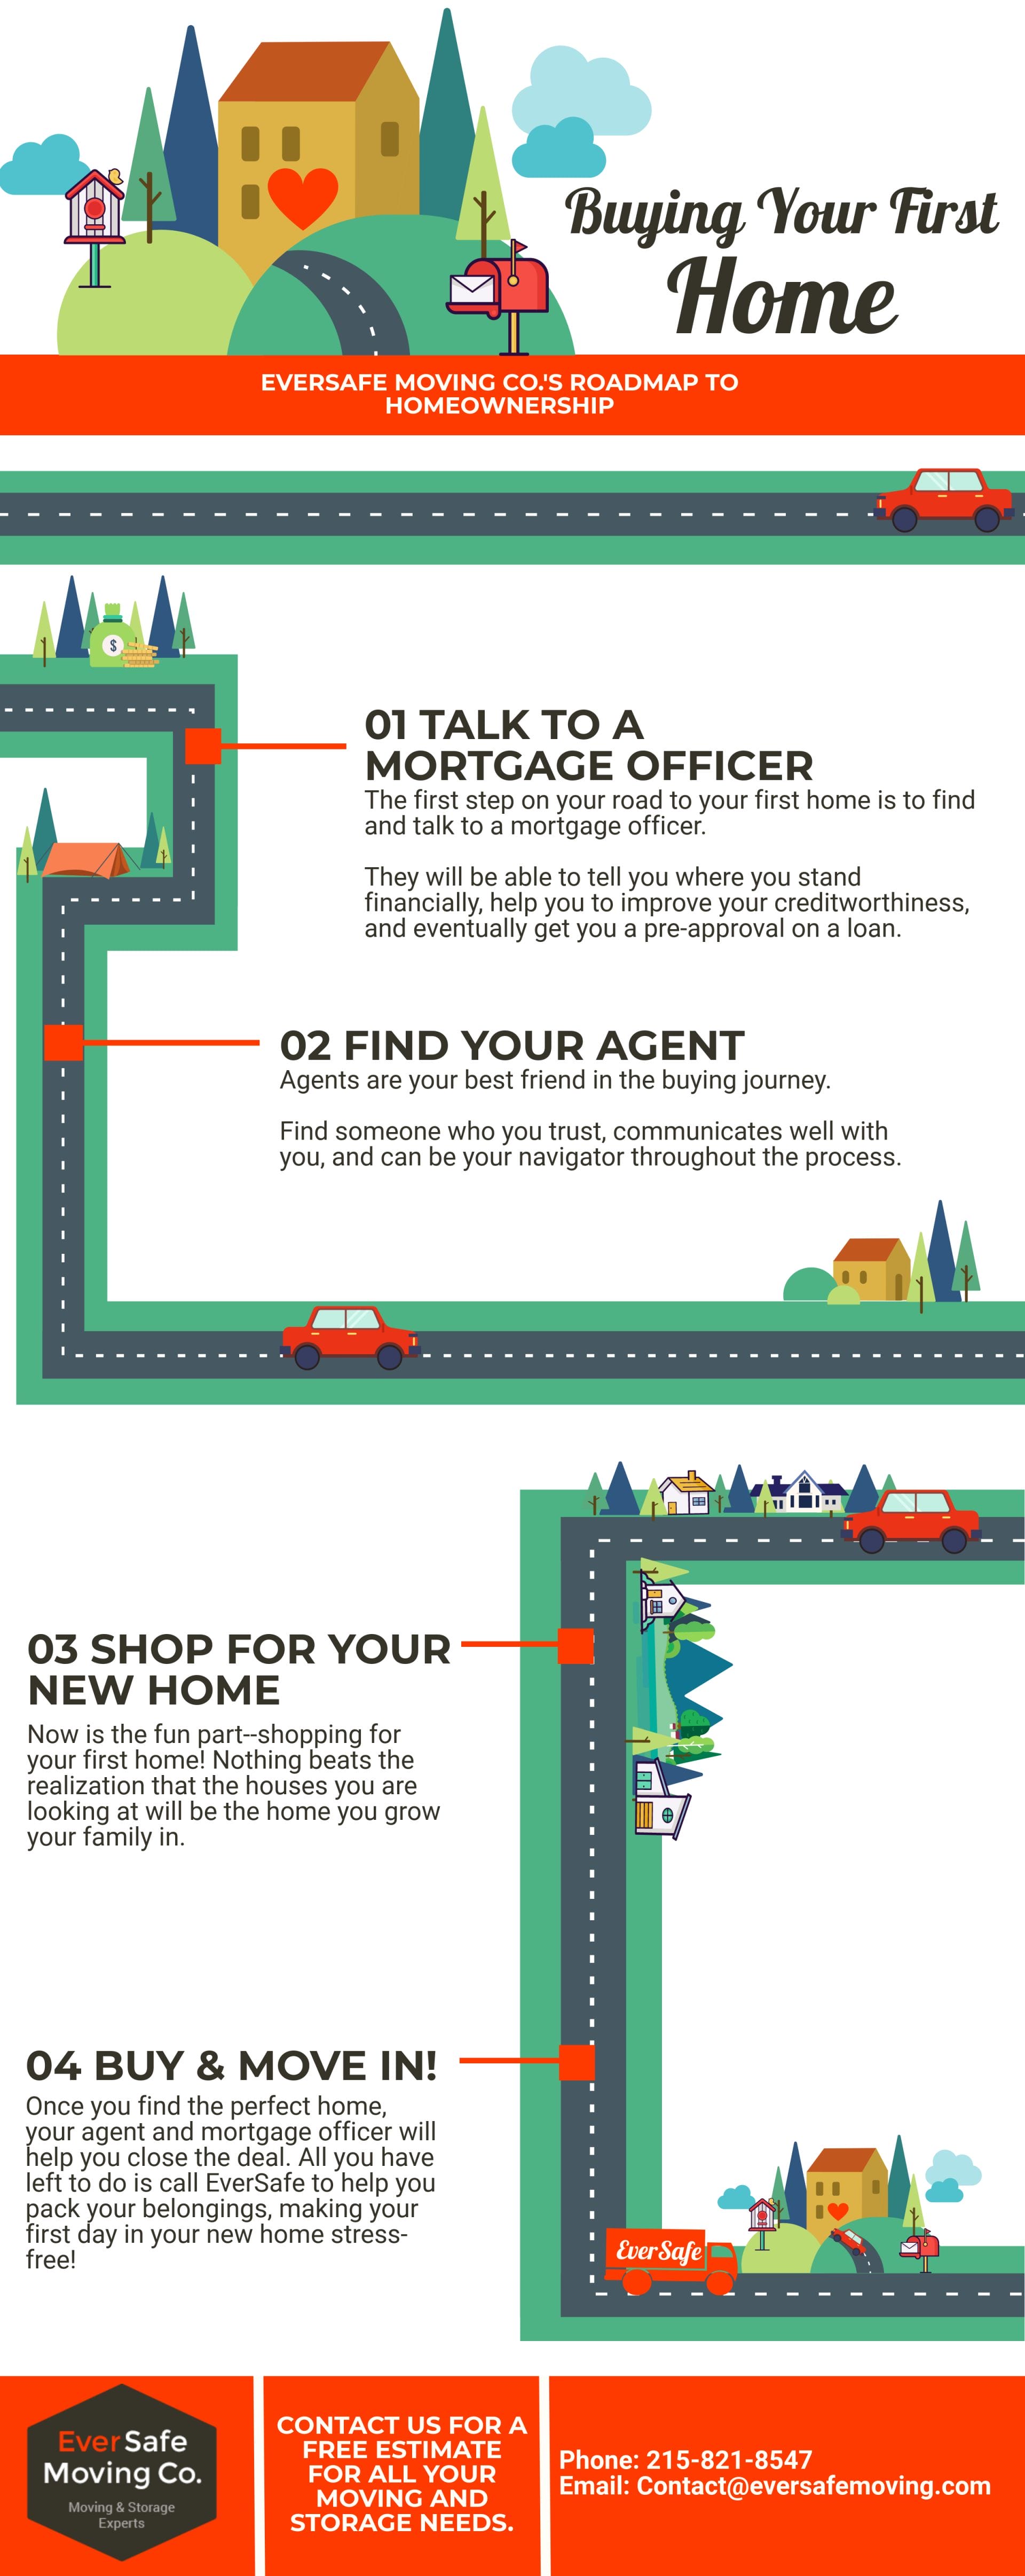 A roadmap to buying and moving into your first home